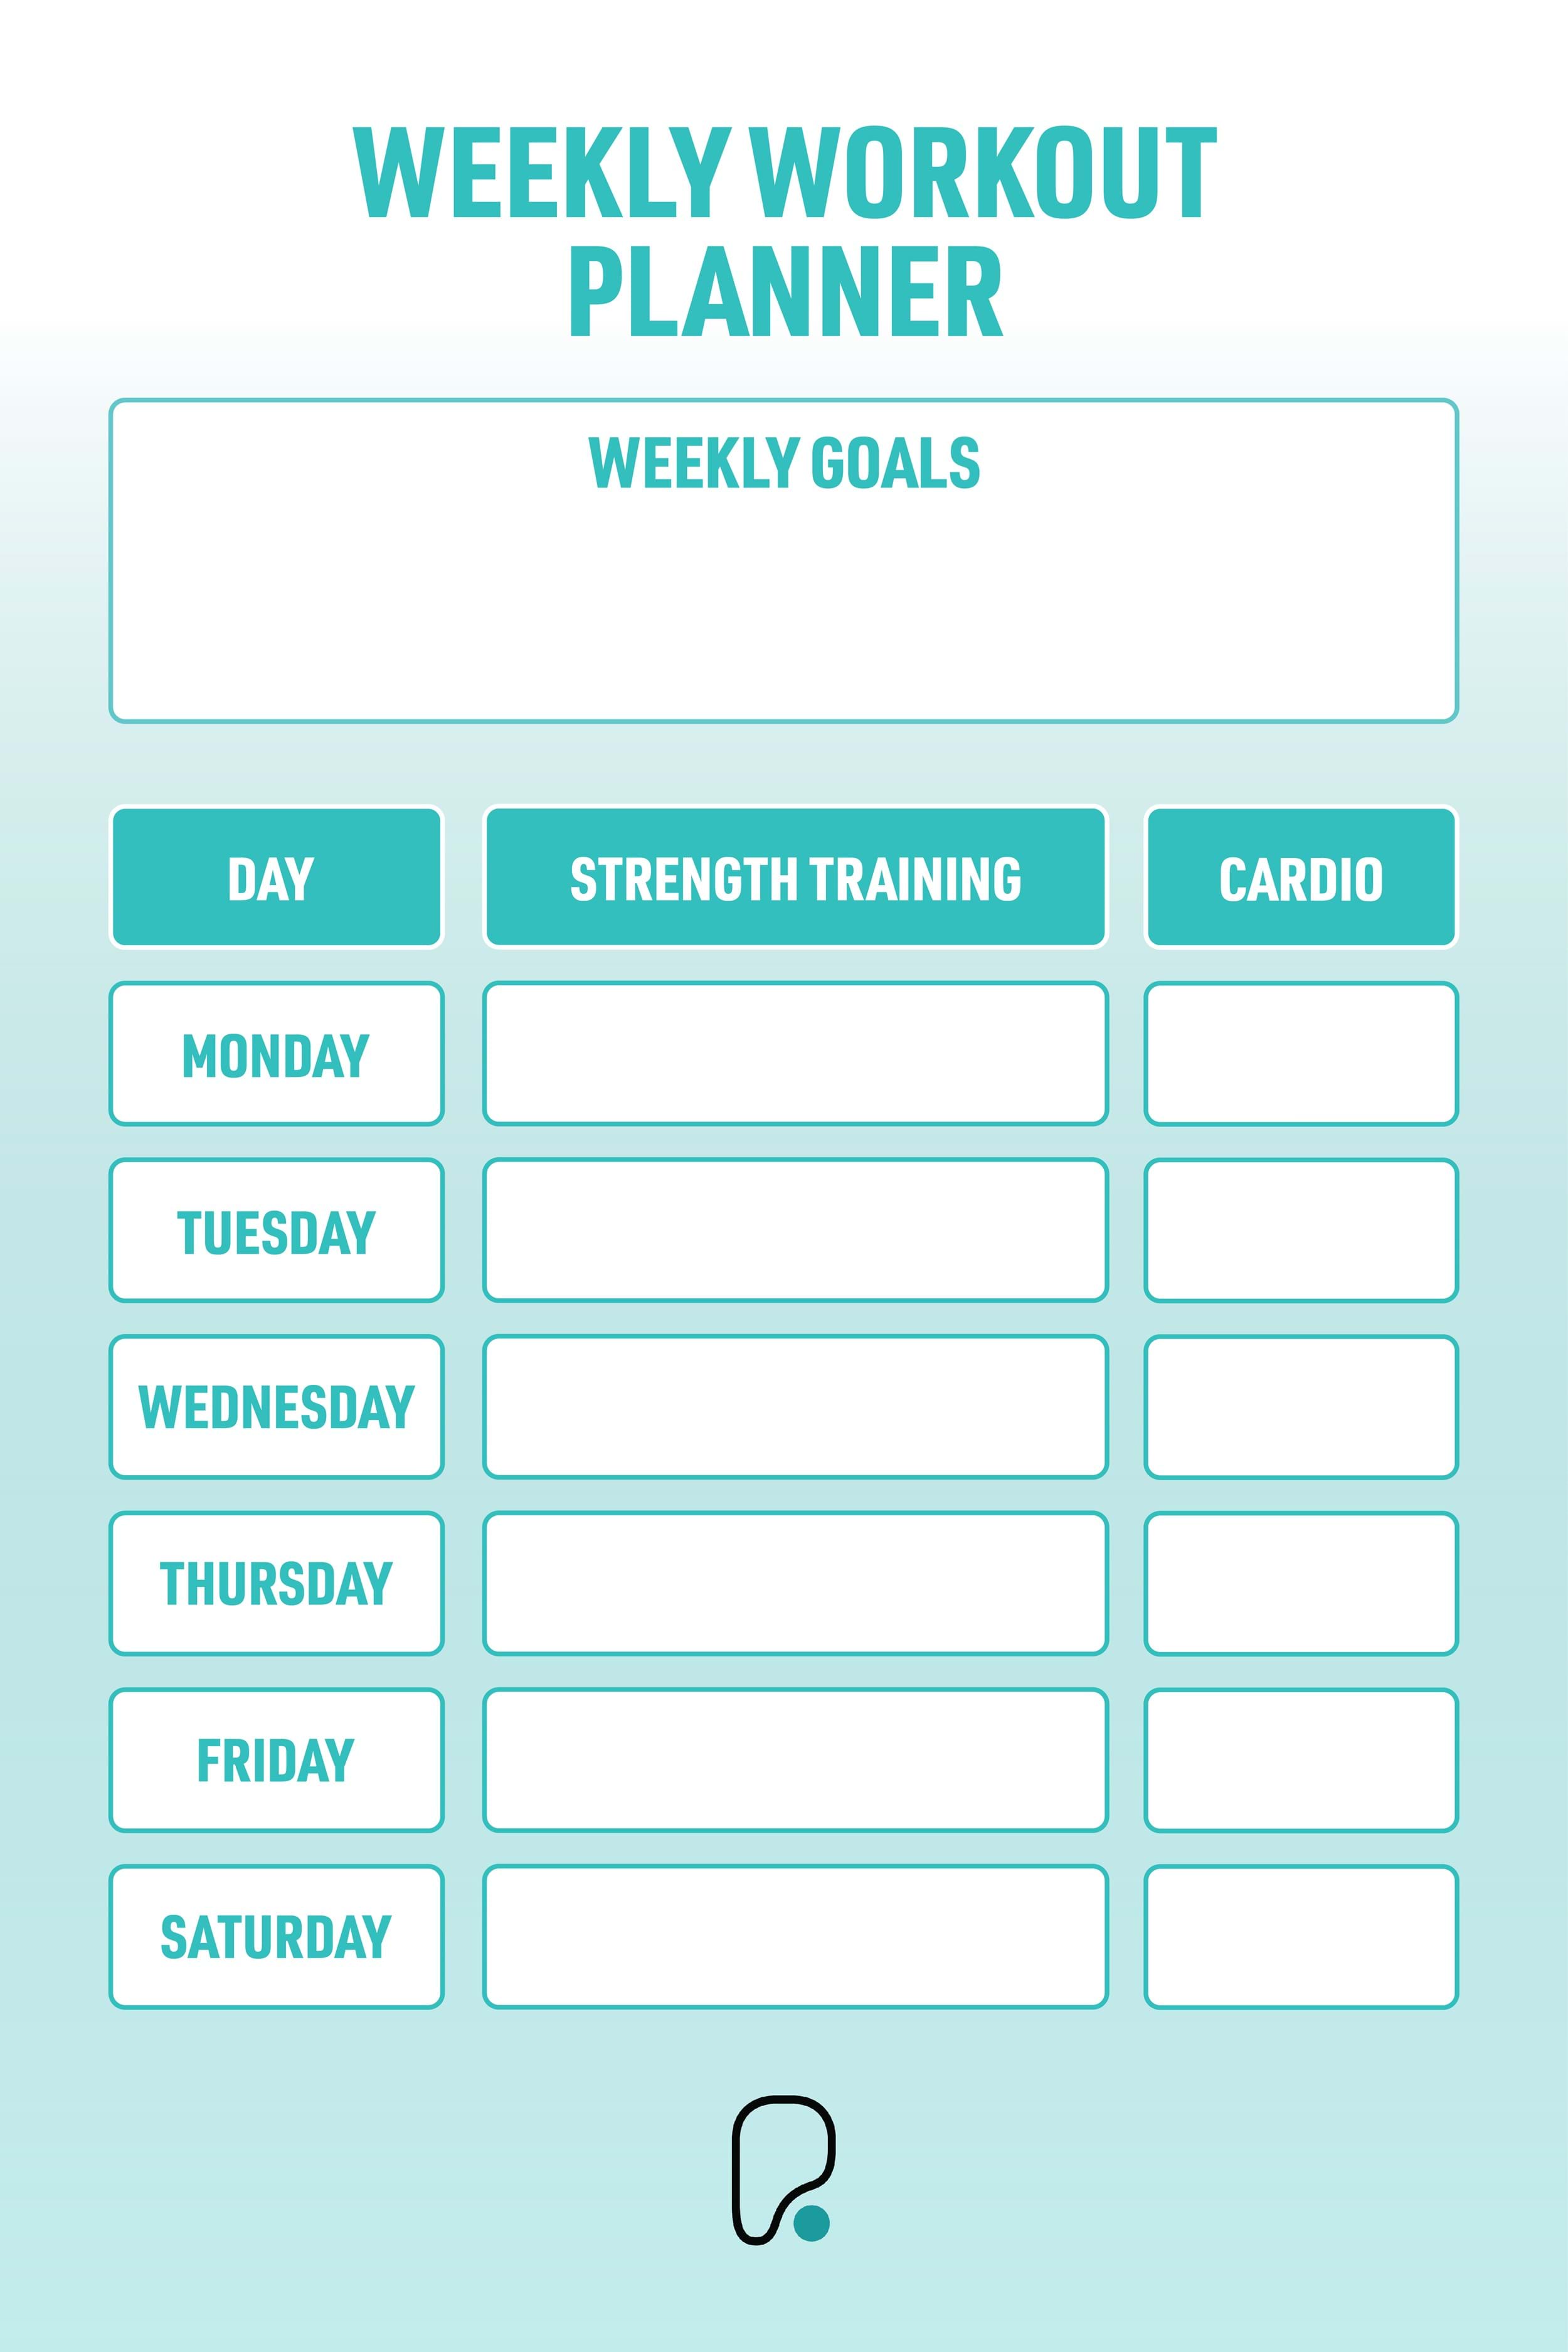 Workout Plan Templates: Download Or Make Yourself